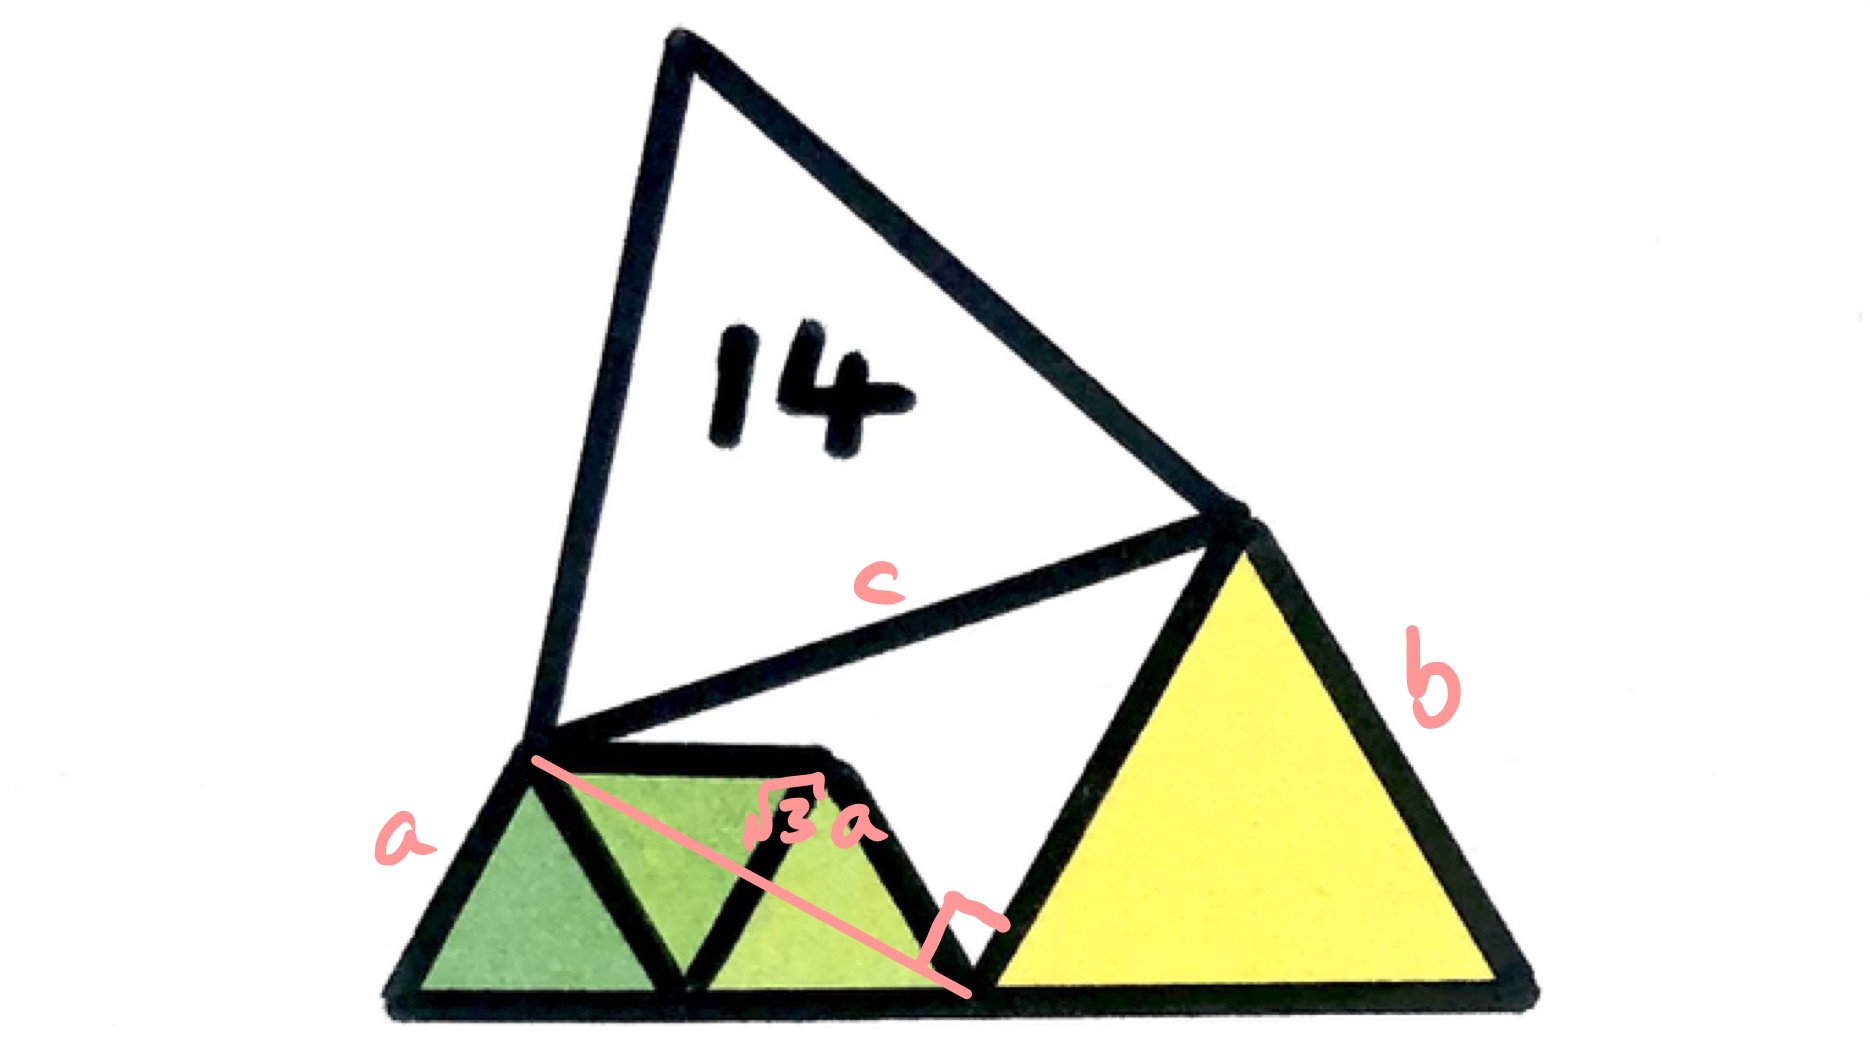 Five equilateral triangles second Pythagoras version